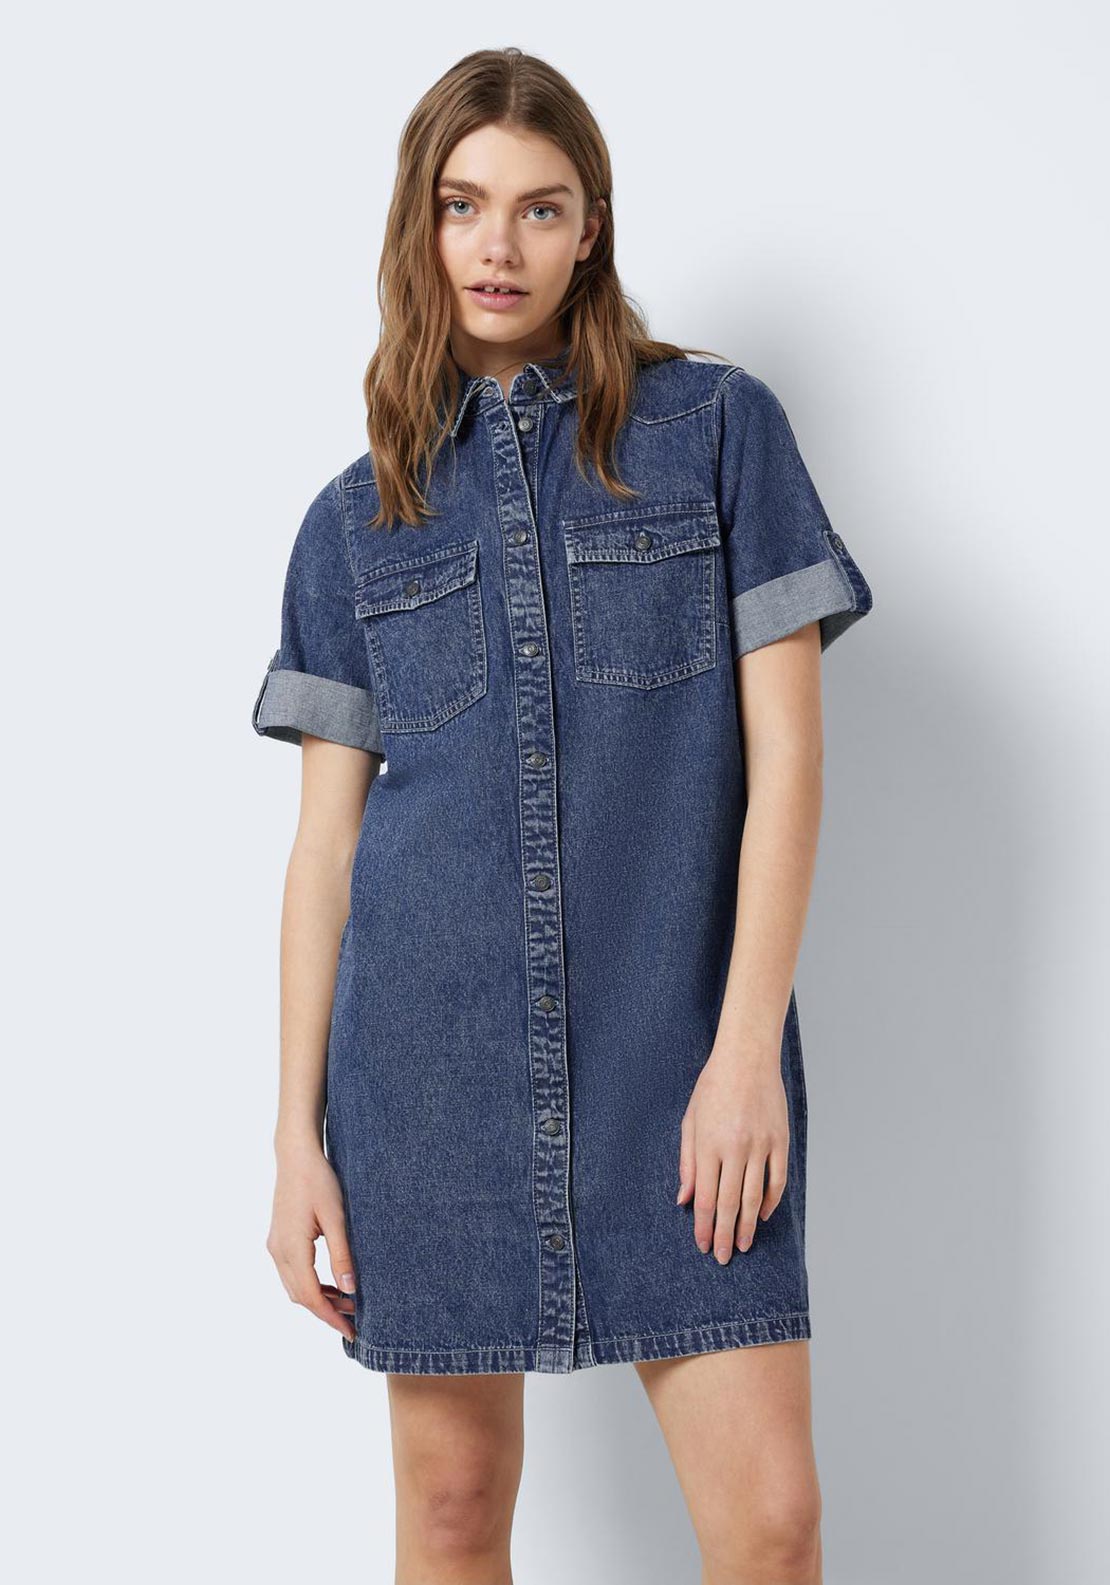 Denim Mini Dress With Zip Front In Medium Blue By Noisy May